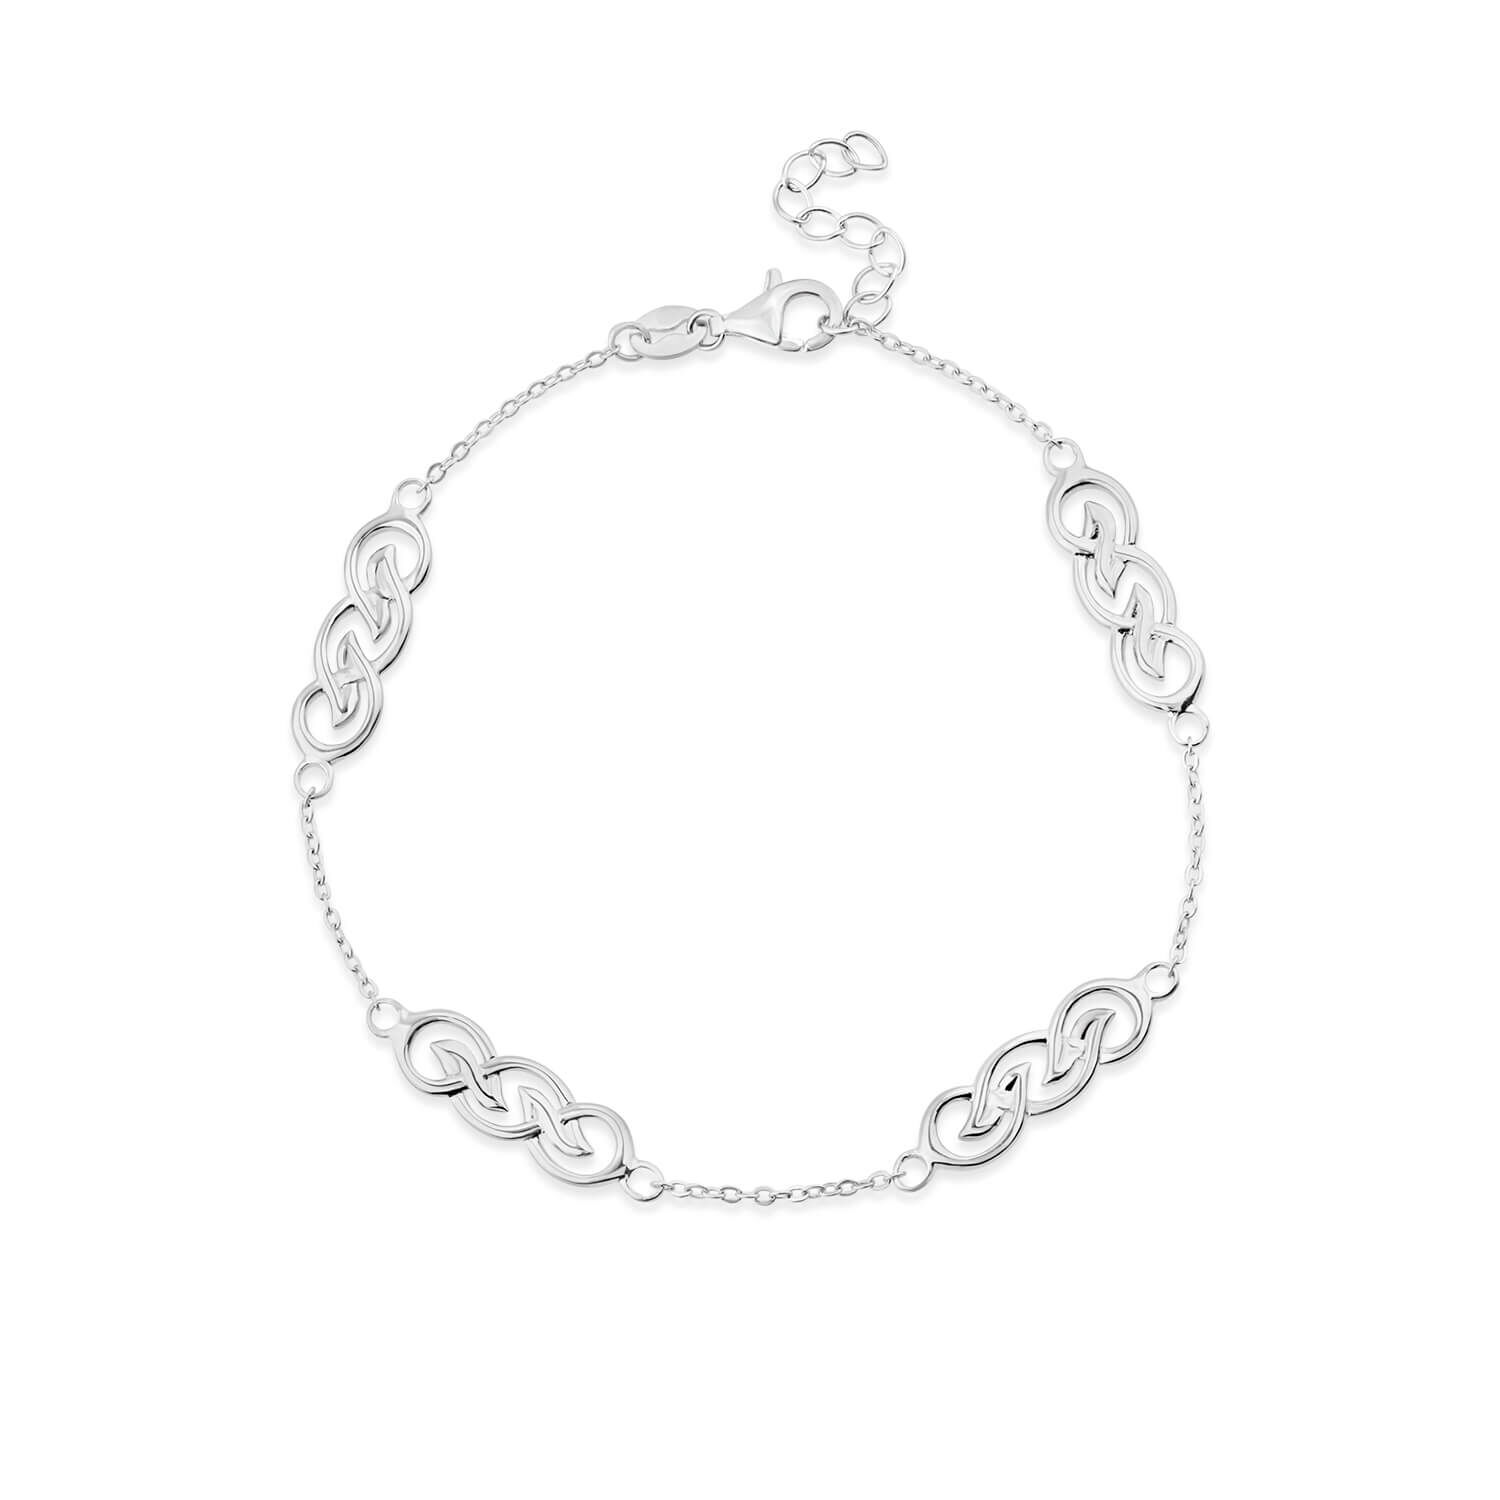 Warren James Jewellers - Our Sterling Silver Celtic Design Bangle makes the  perfect gift for your lover, with the never ending knot representing your  never ending love. Available in Shops only.. Find